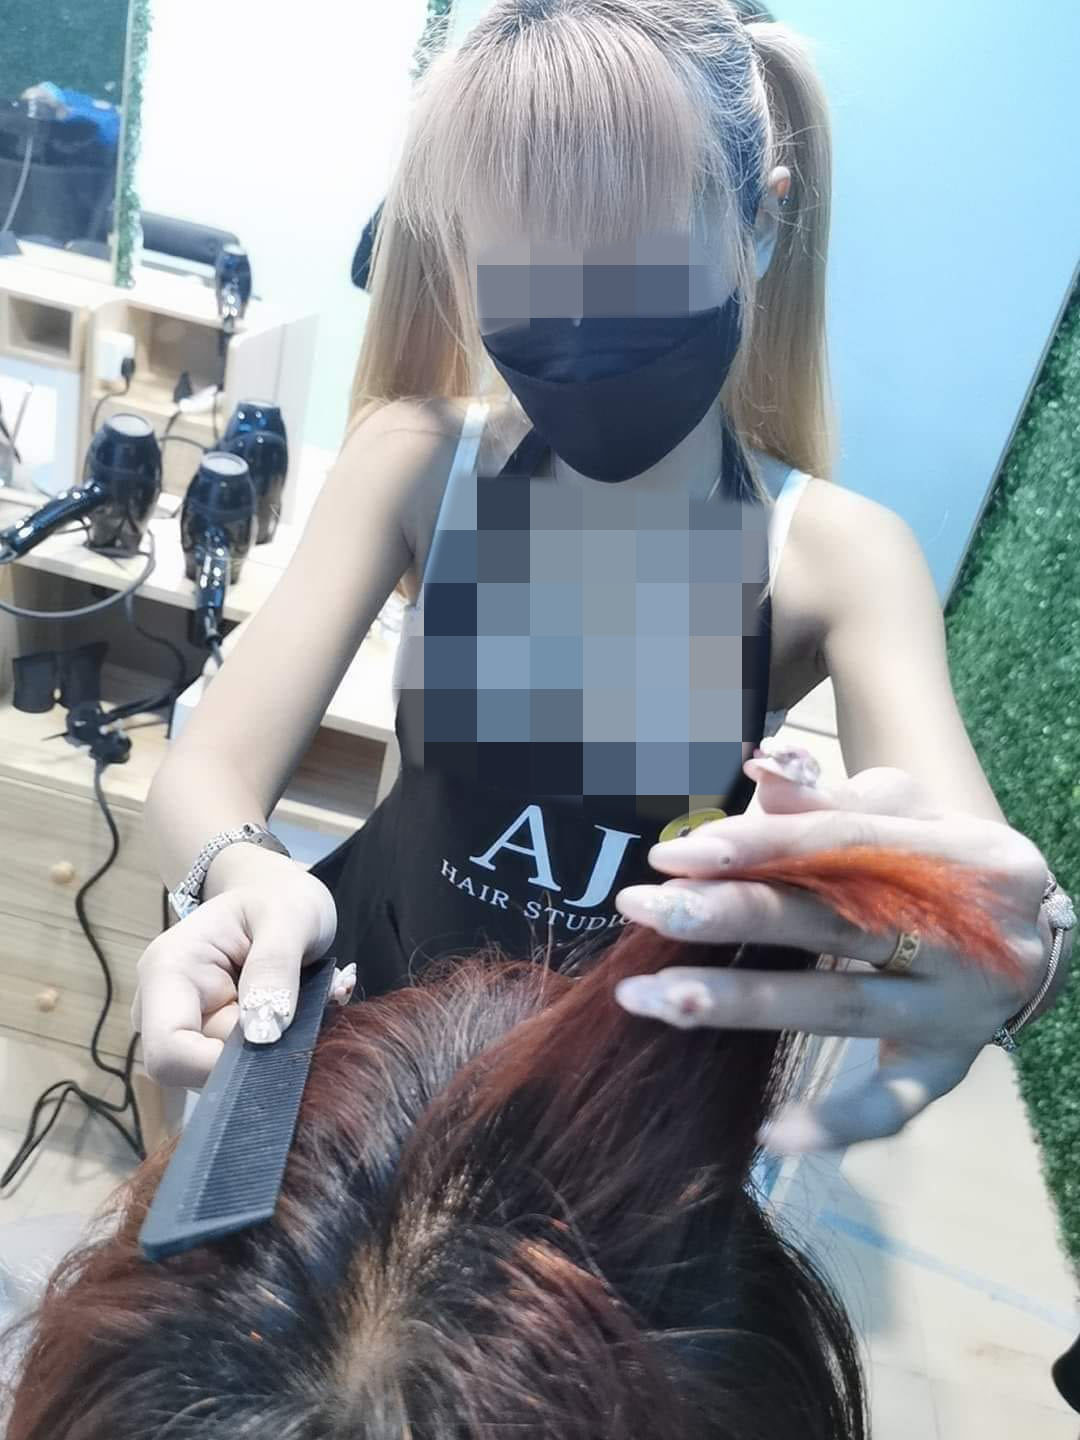 AJ Hair Studio landed themselves in hot water after using scantily-clad Thai models to promote their grand opening. Image credit: 十强